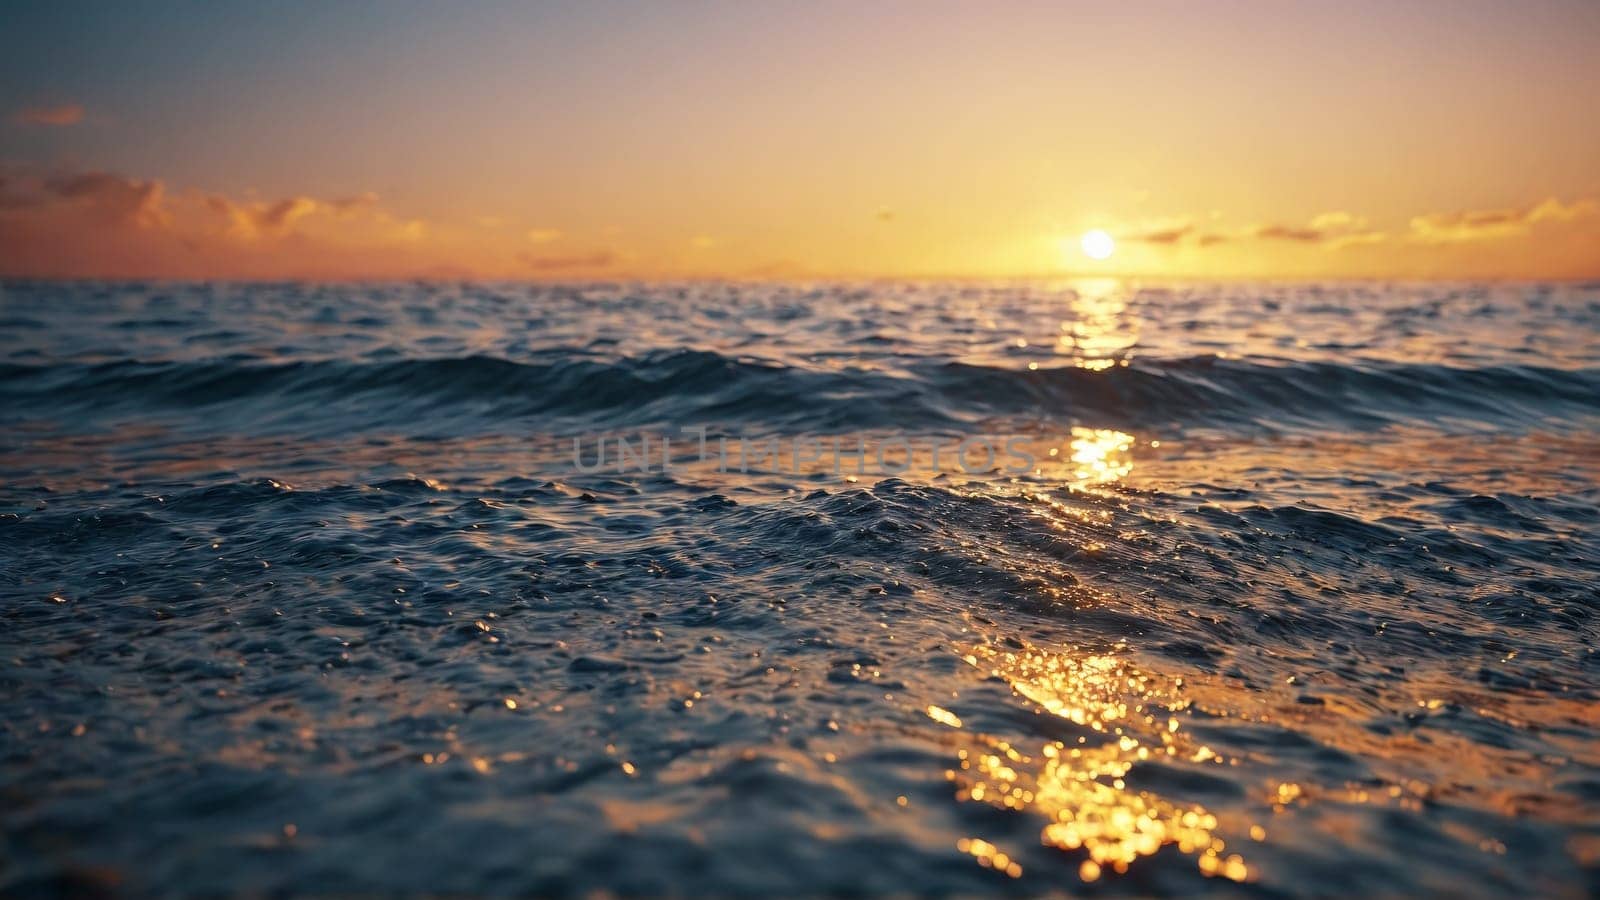 Shimmering path of water drops across tranquil sea at sunset guiding light symbolic journey profound by panophotograph